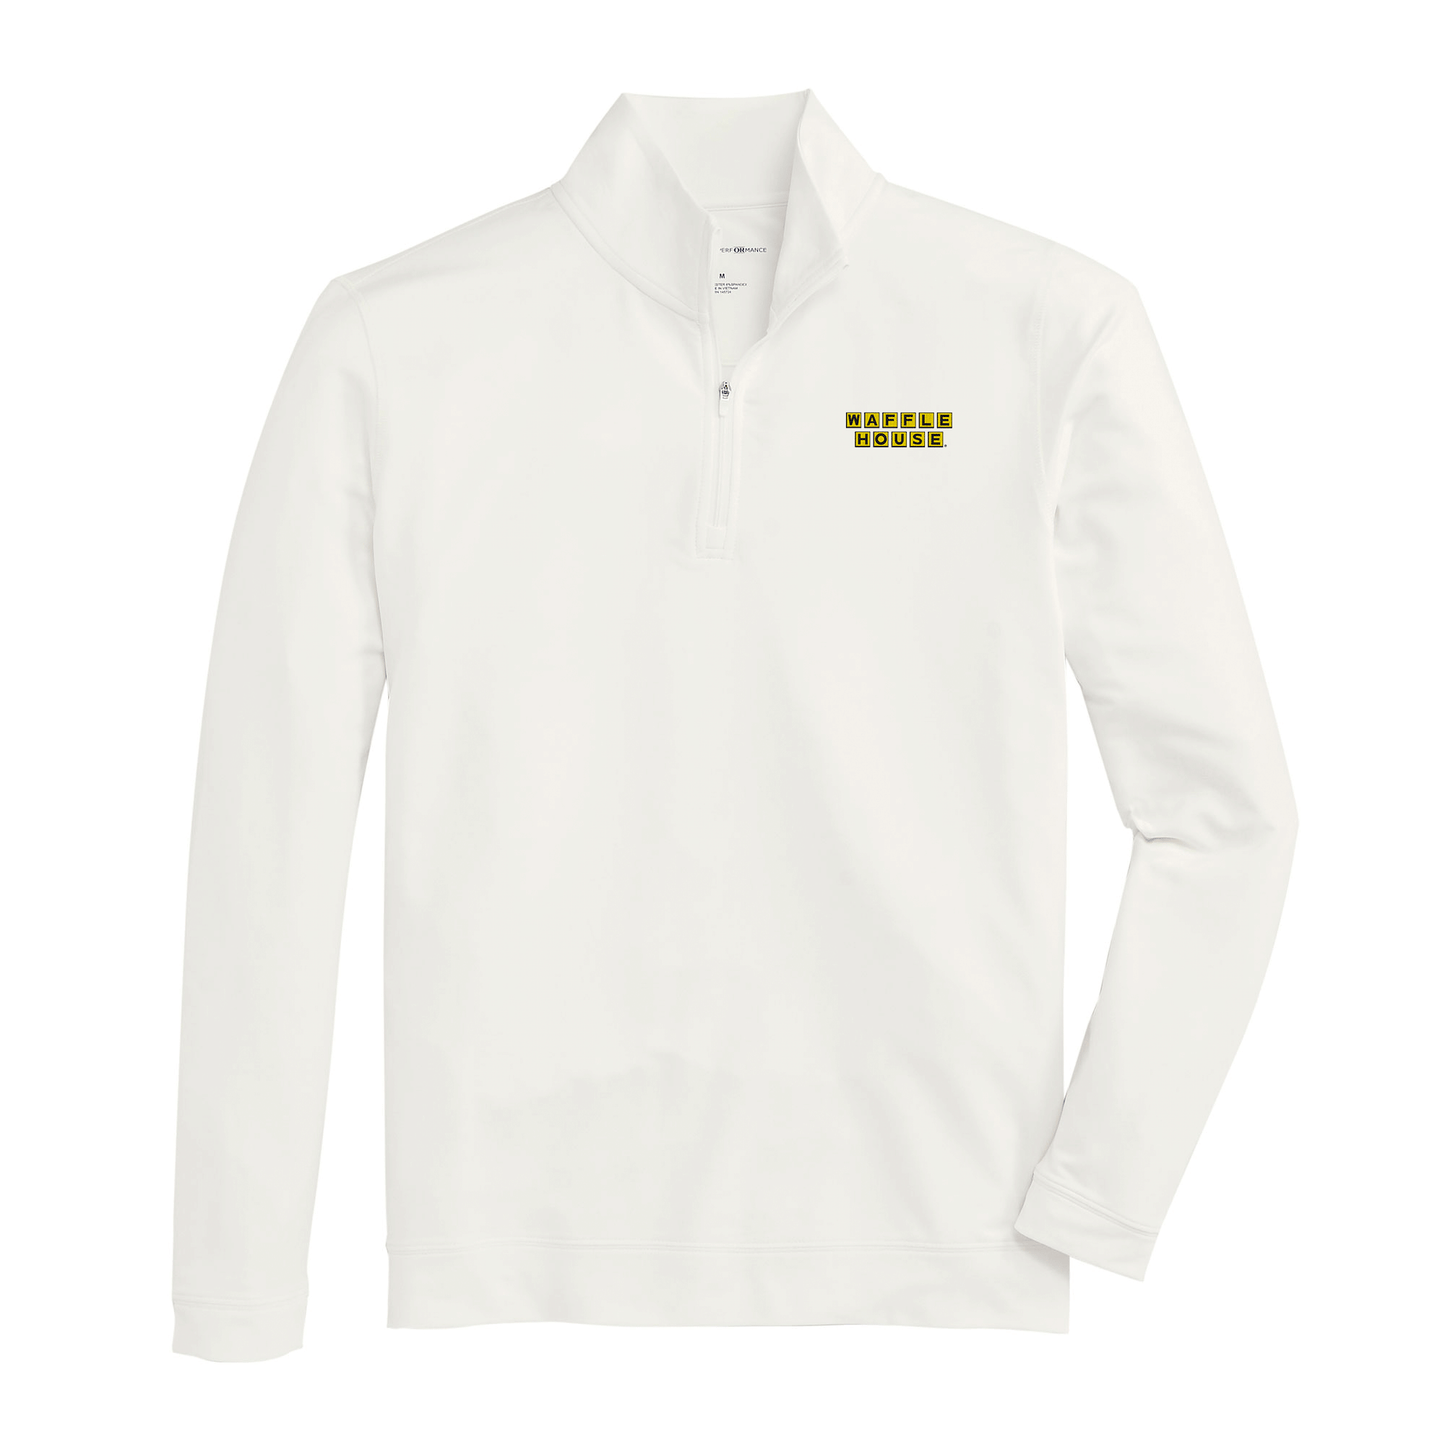 Waffle House Flow 1/4 Zip Pullover - White